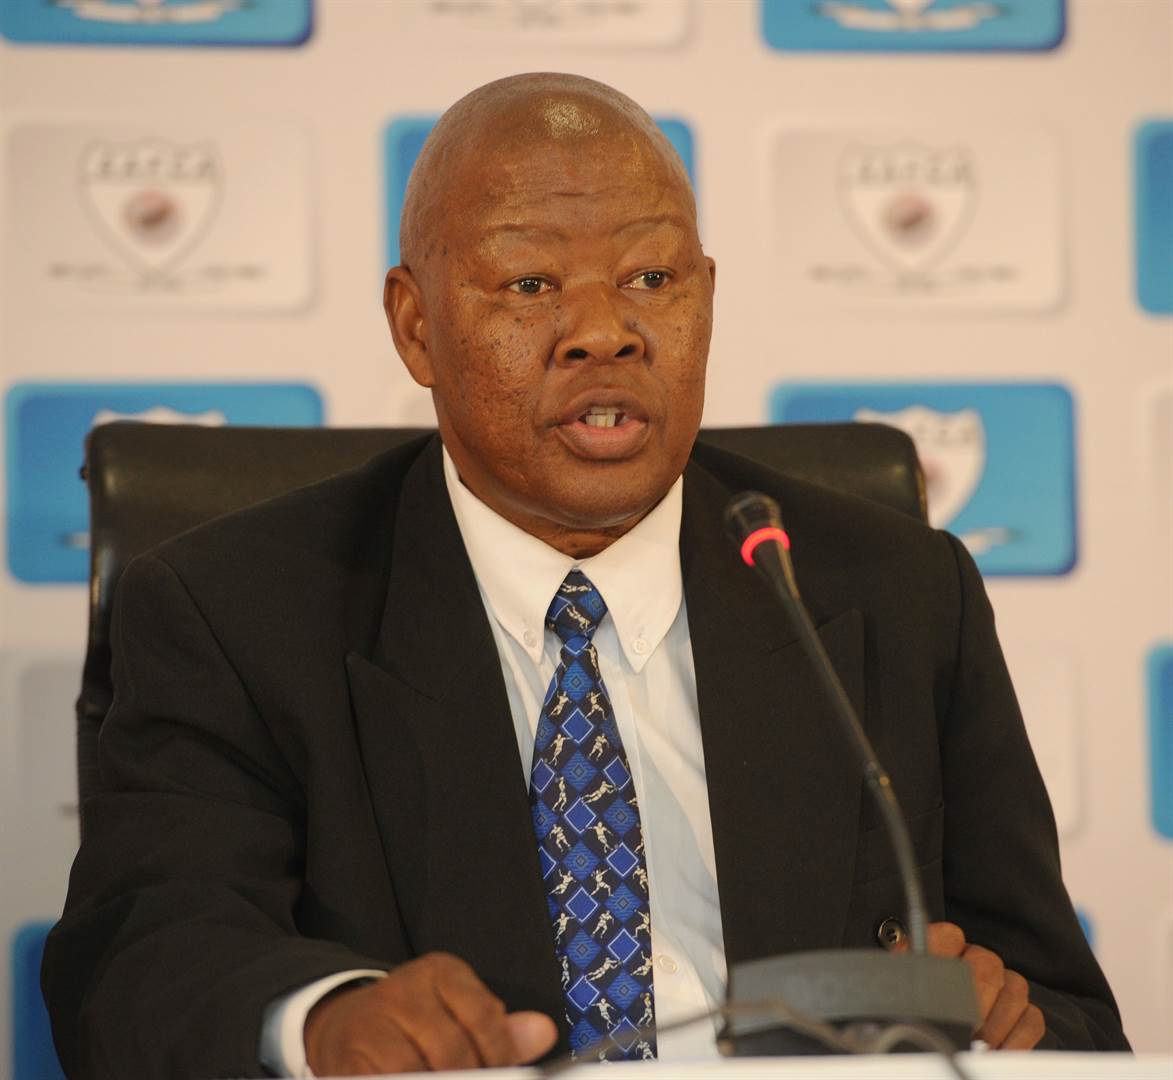 Safca, led by former Banyana Banyana and youth national team coach Greg Mashilo as president, is an associate member of Safa.